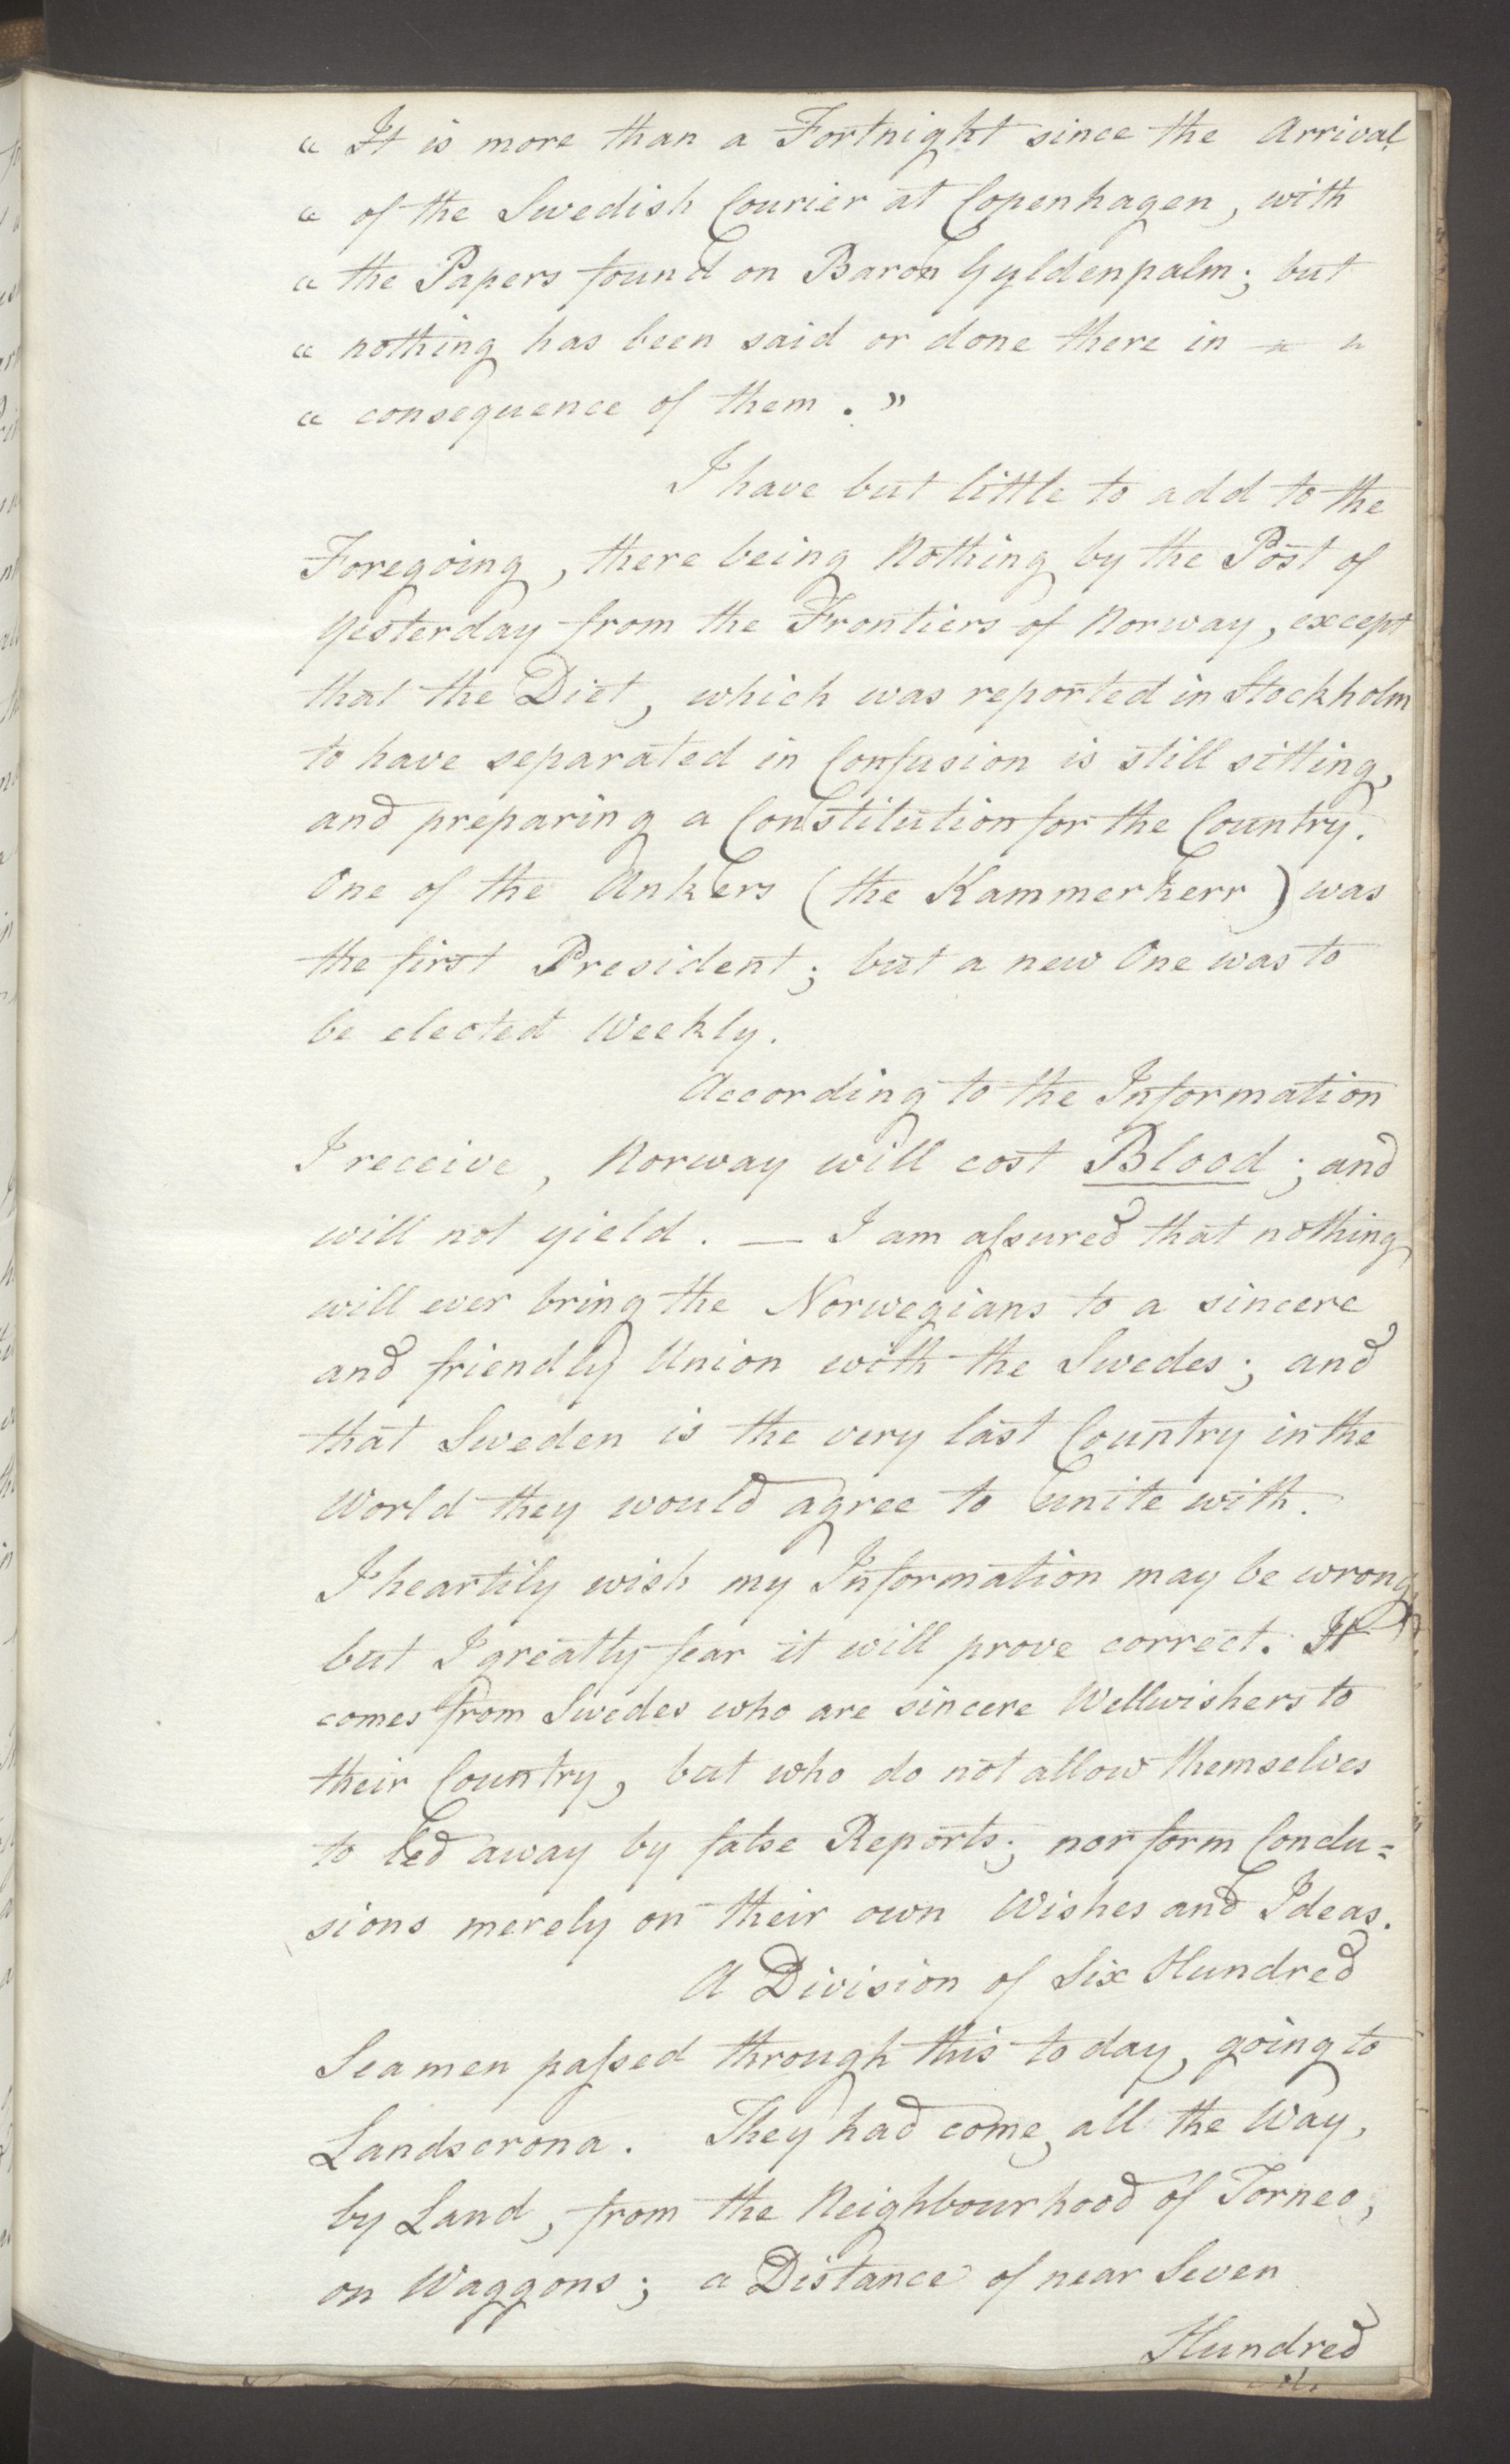 Foreign Office*, UKA/-/FO 38/16: Sir C. Gordon. Reports from Malmö, Jonkoping, and Helsingborg, 1814, s. 55